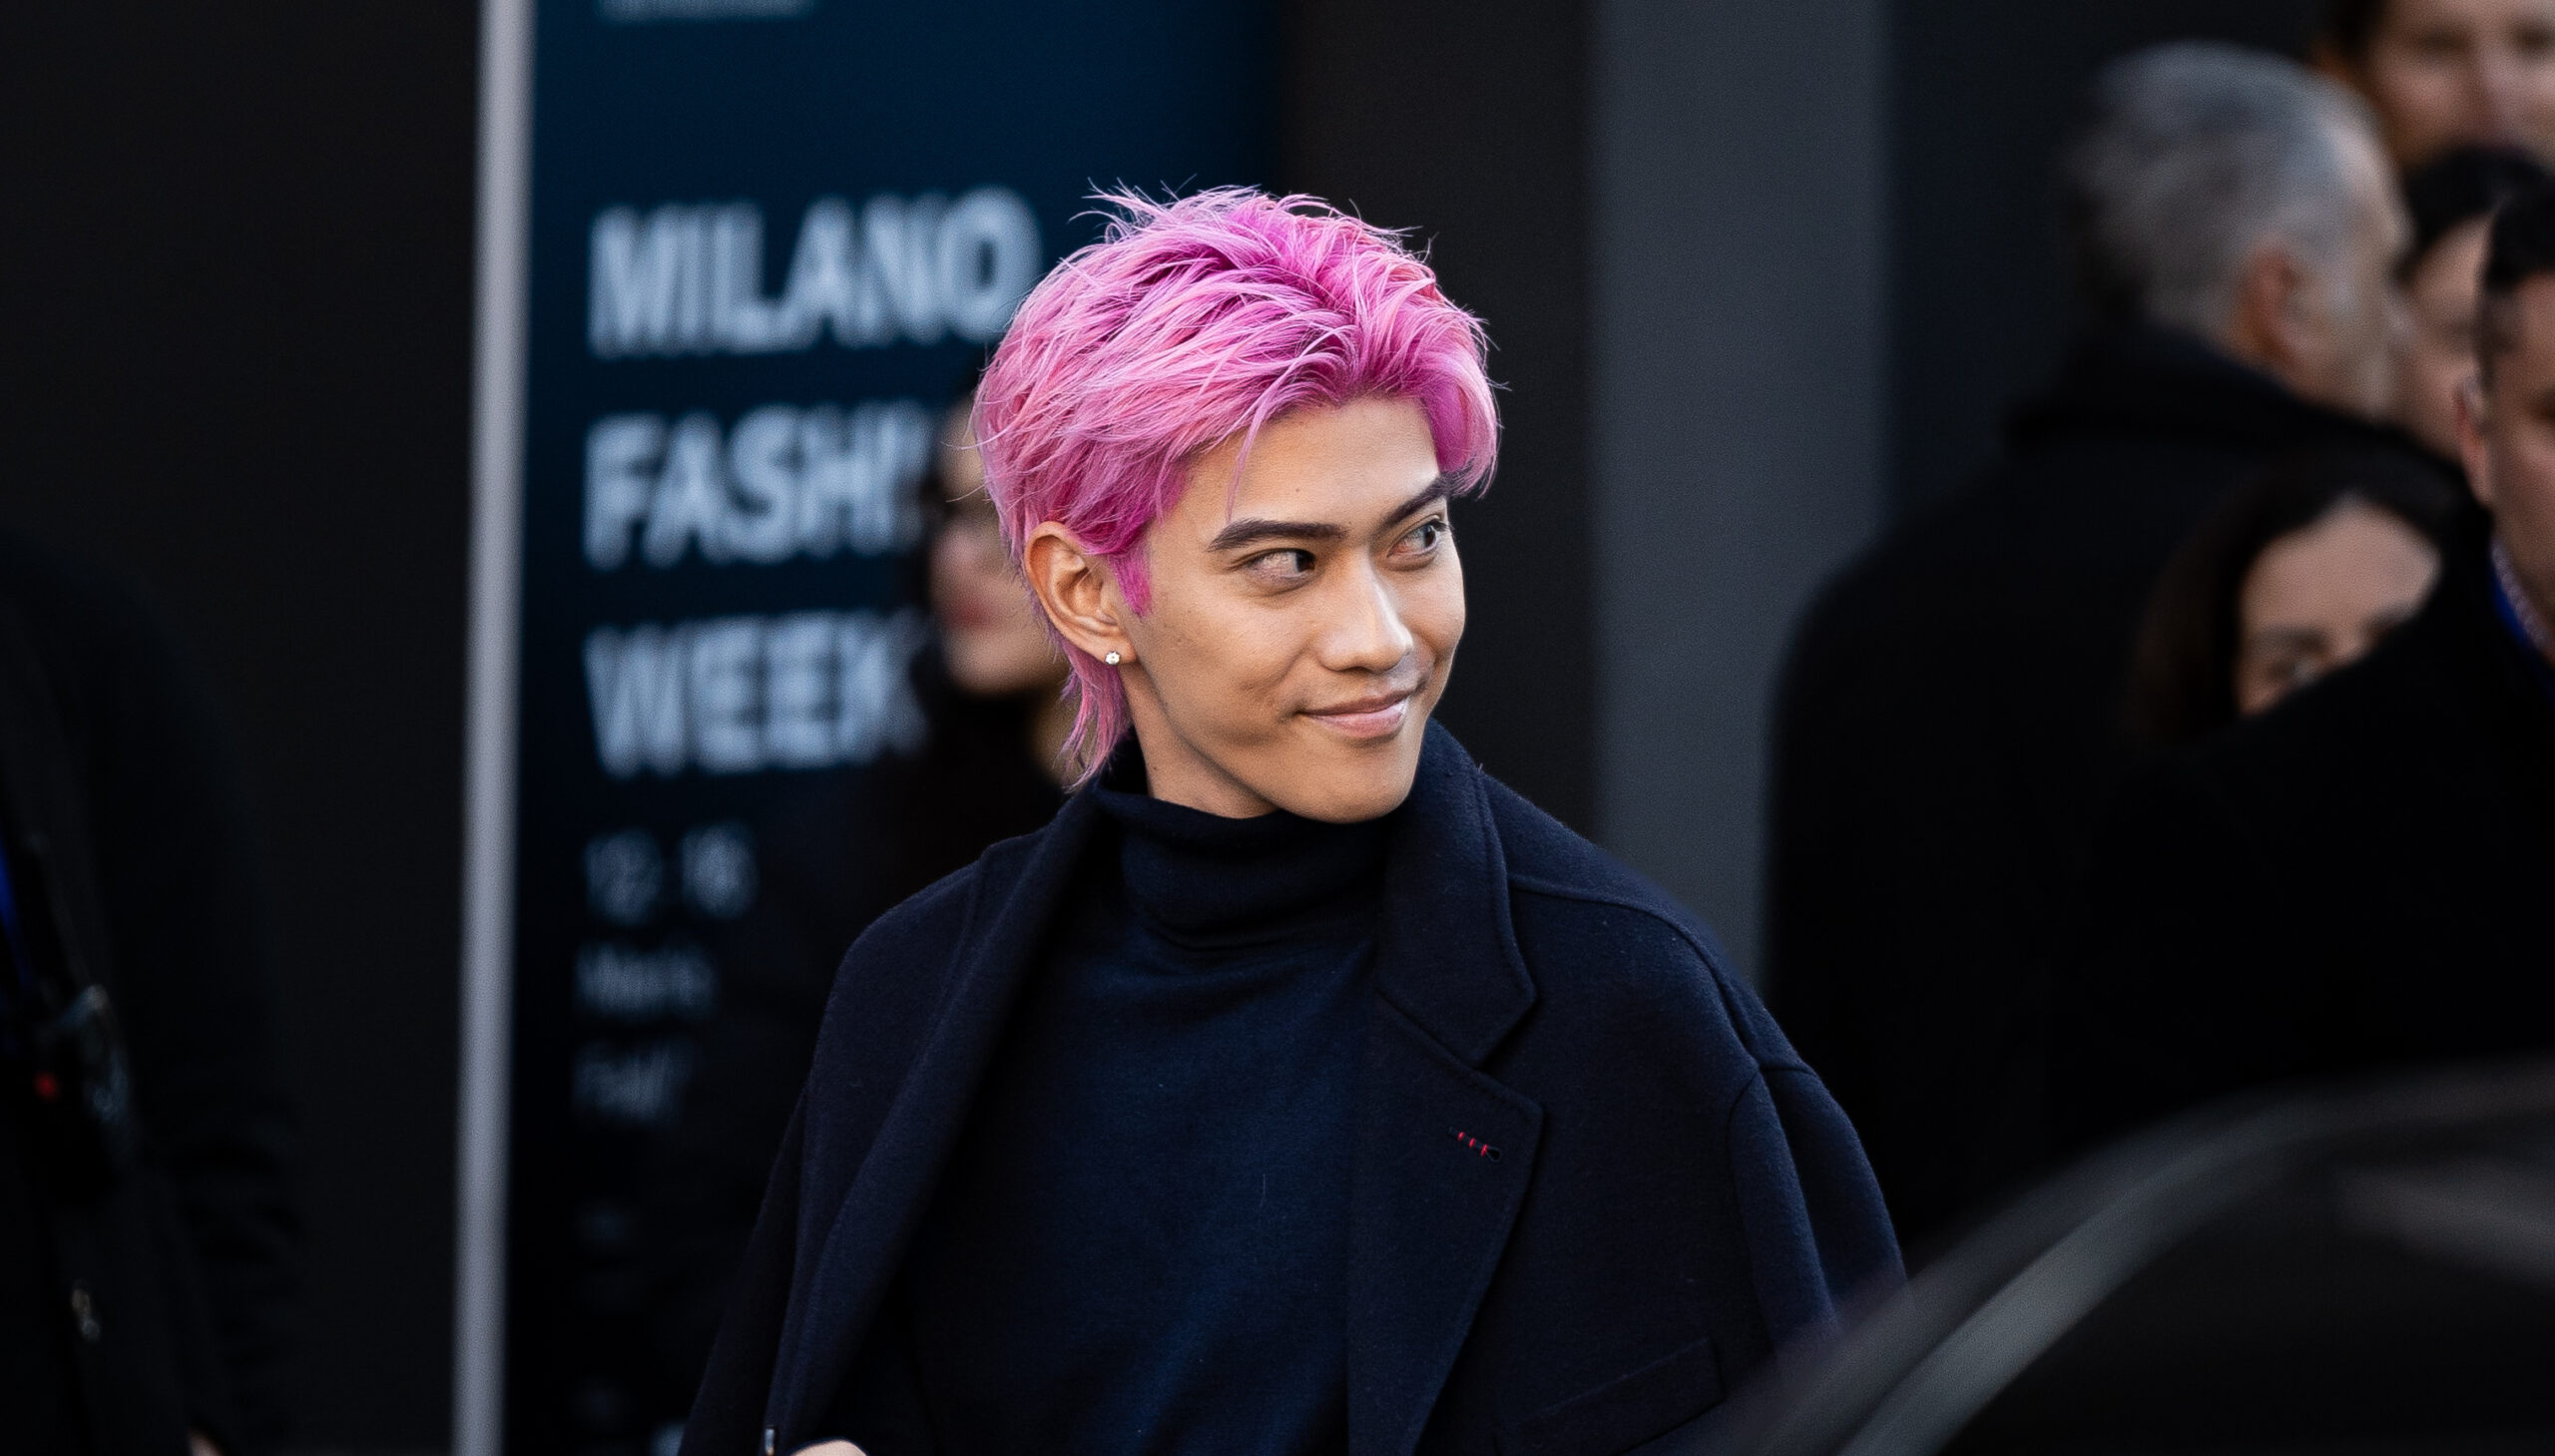 Yamato, with pink hair, arrives at the Gucci FW24-25 men's show during Milan Fashion Week, carrying a black handbag.